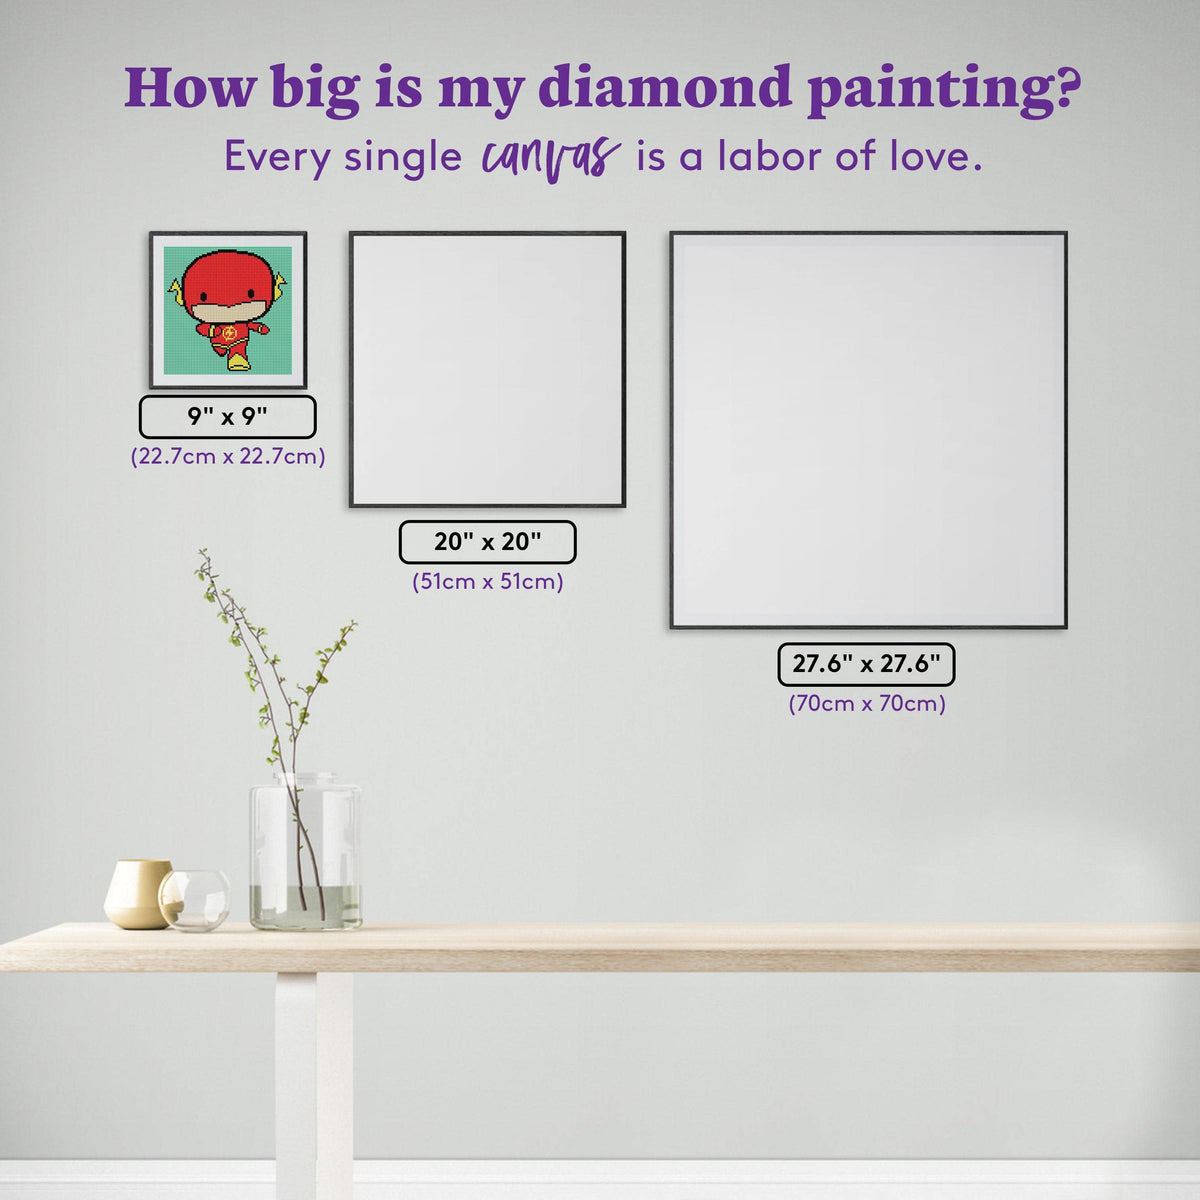 Diamond Painting Flash Chibi 9" x 9" (22.7cm x 22.7cm) / Round With 15 Colors Including 1 ABs and 1 Fairy Dust Diamonds / 6,561